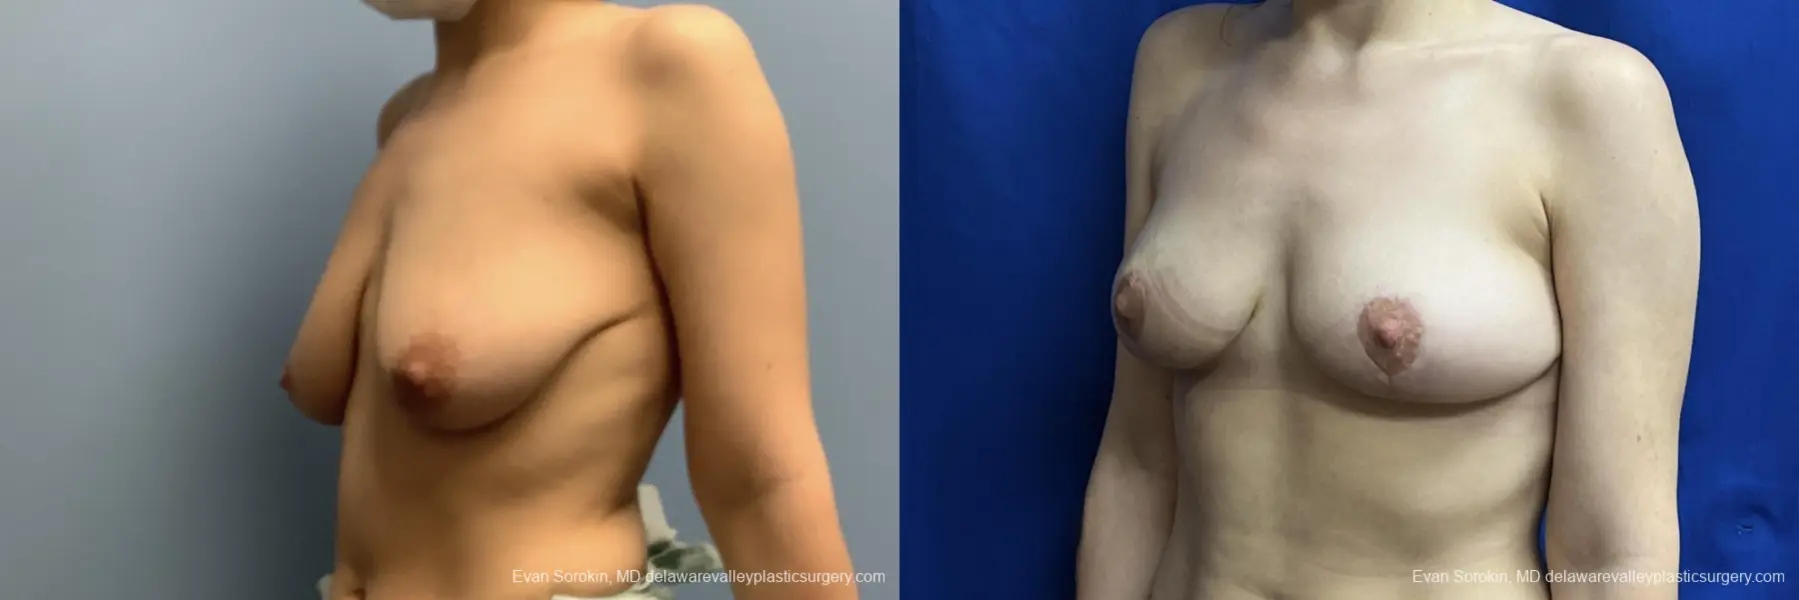 Breast Reduction: Patient 8 - Before and After 4